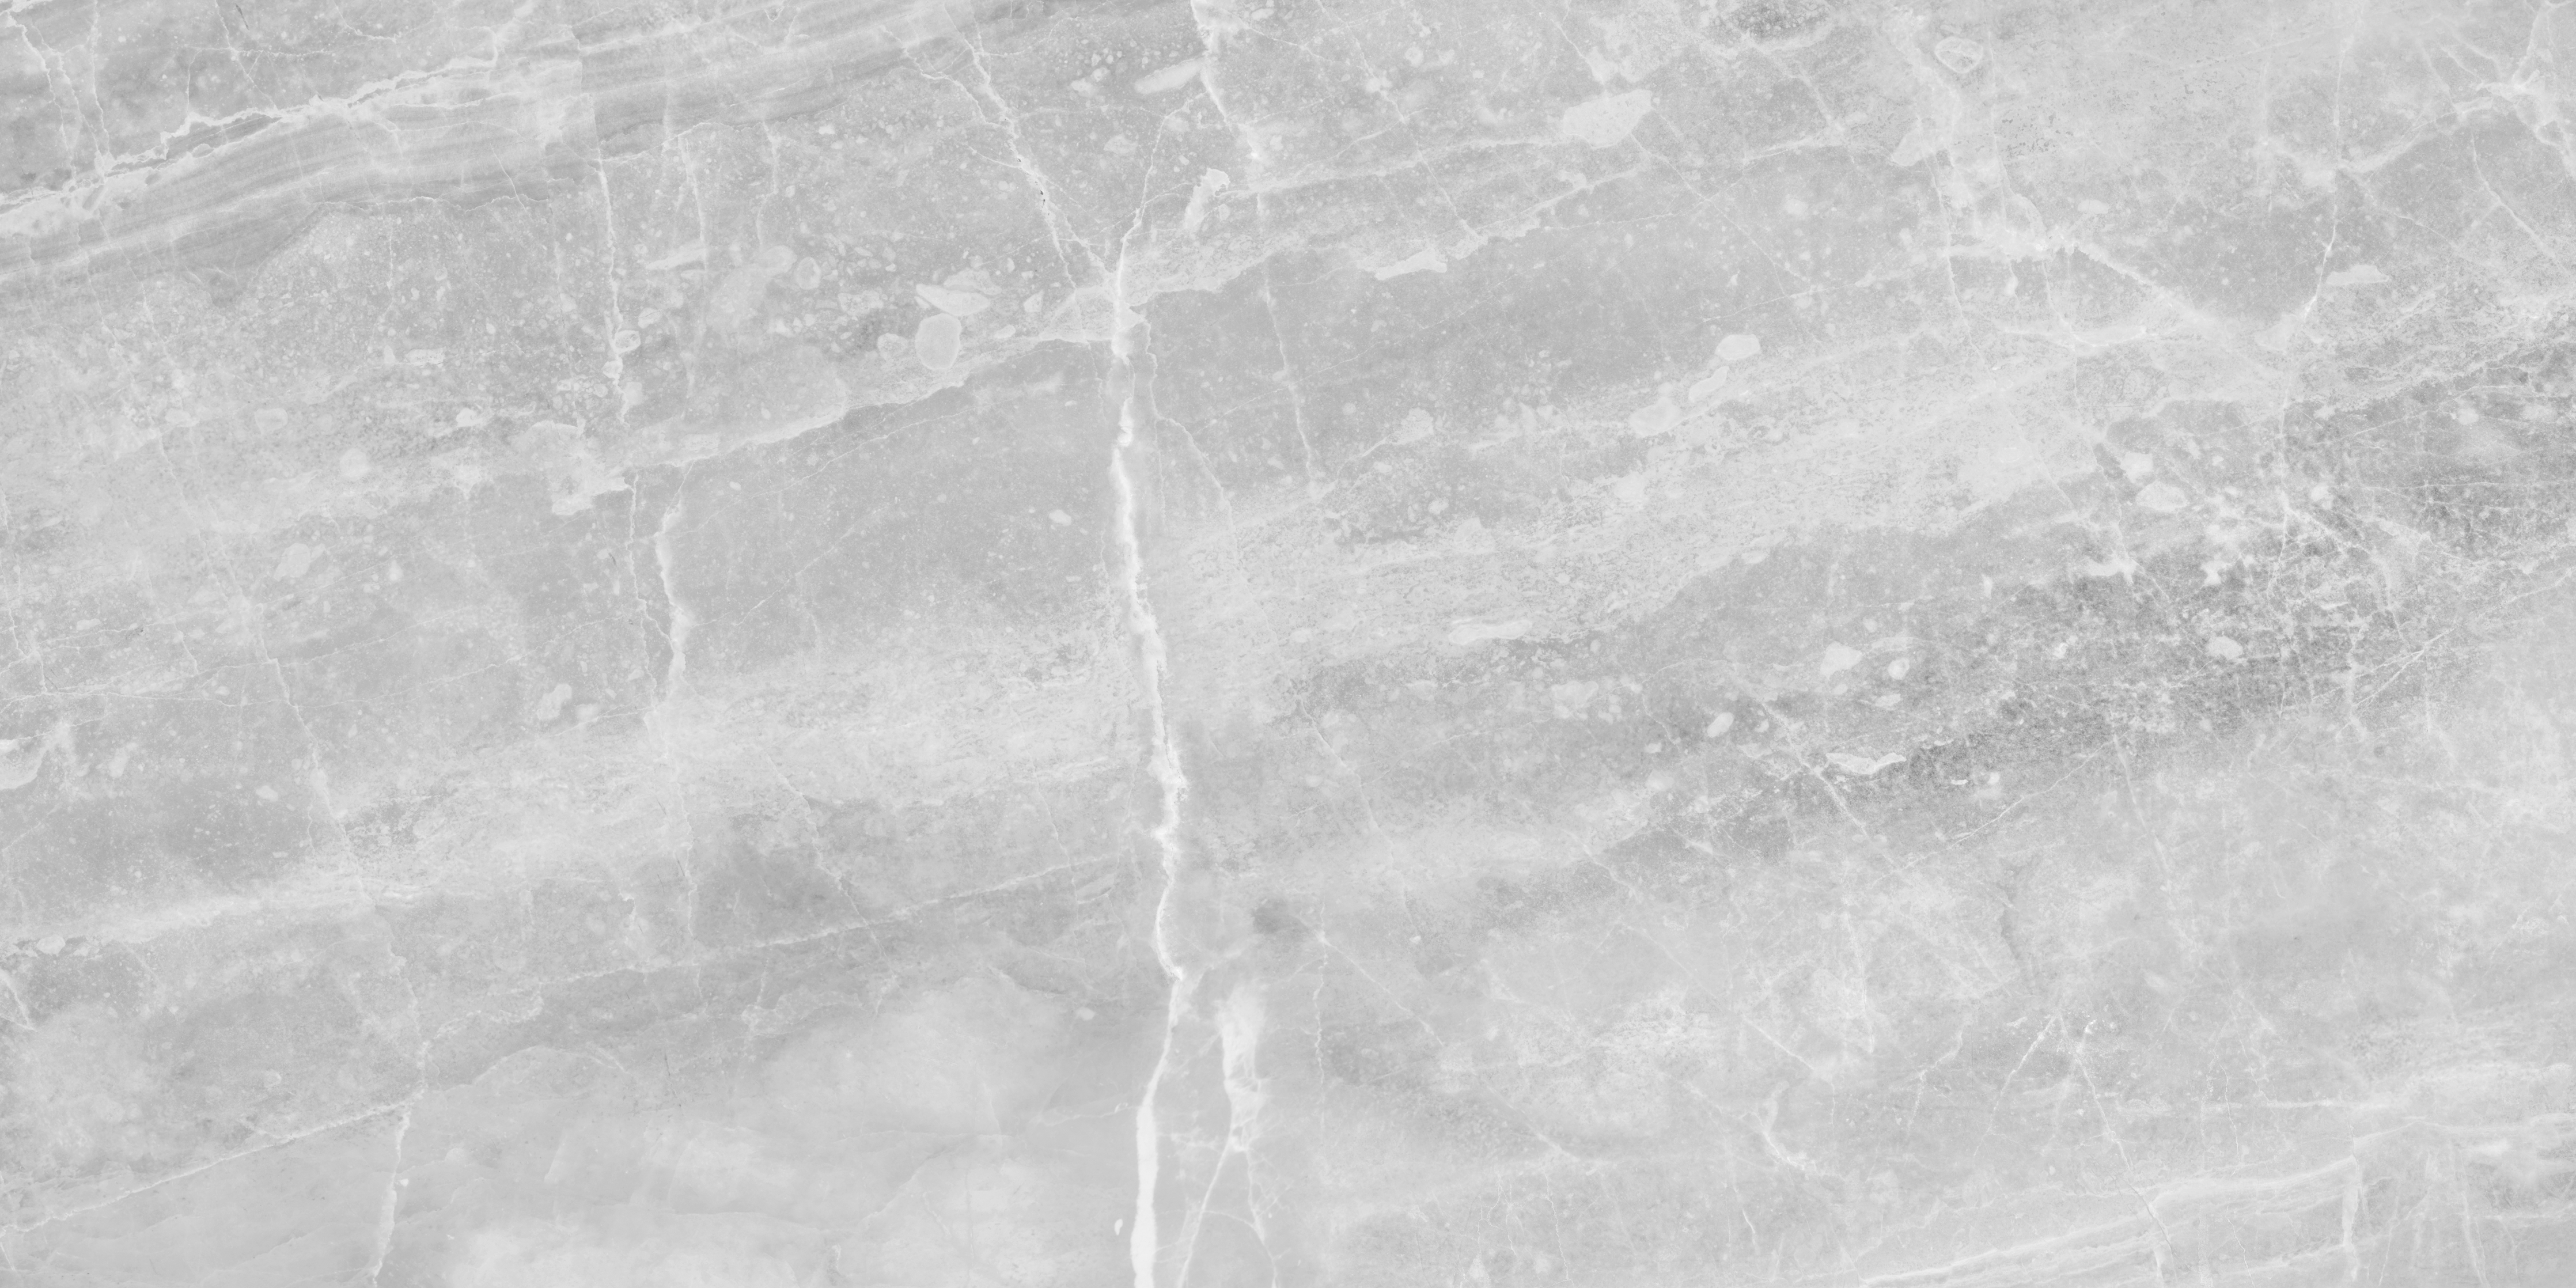 perla grigia pattern glazed porcelain field tile from plata anatolia collection distributed by surface group international polished finish rectified edge 12x24 rectangle shape